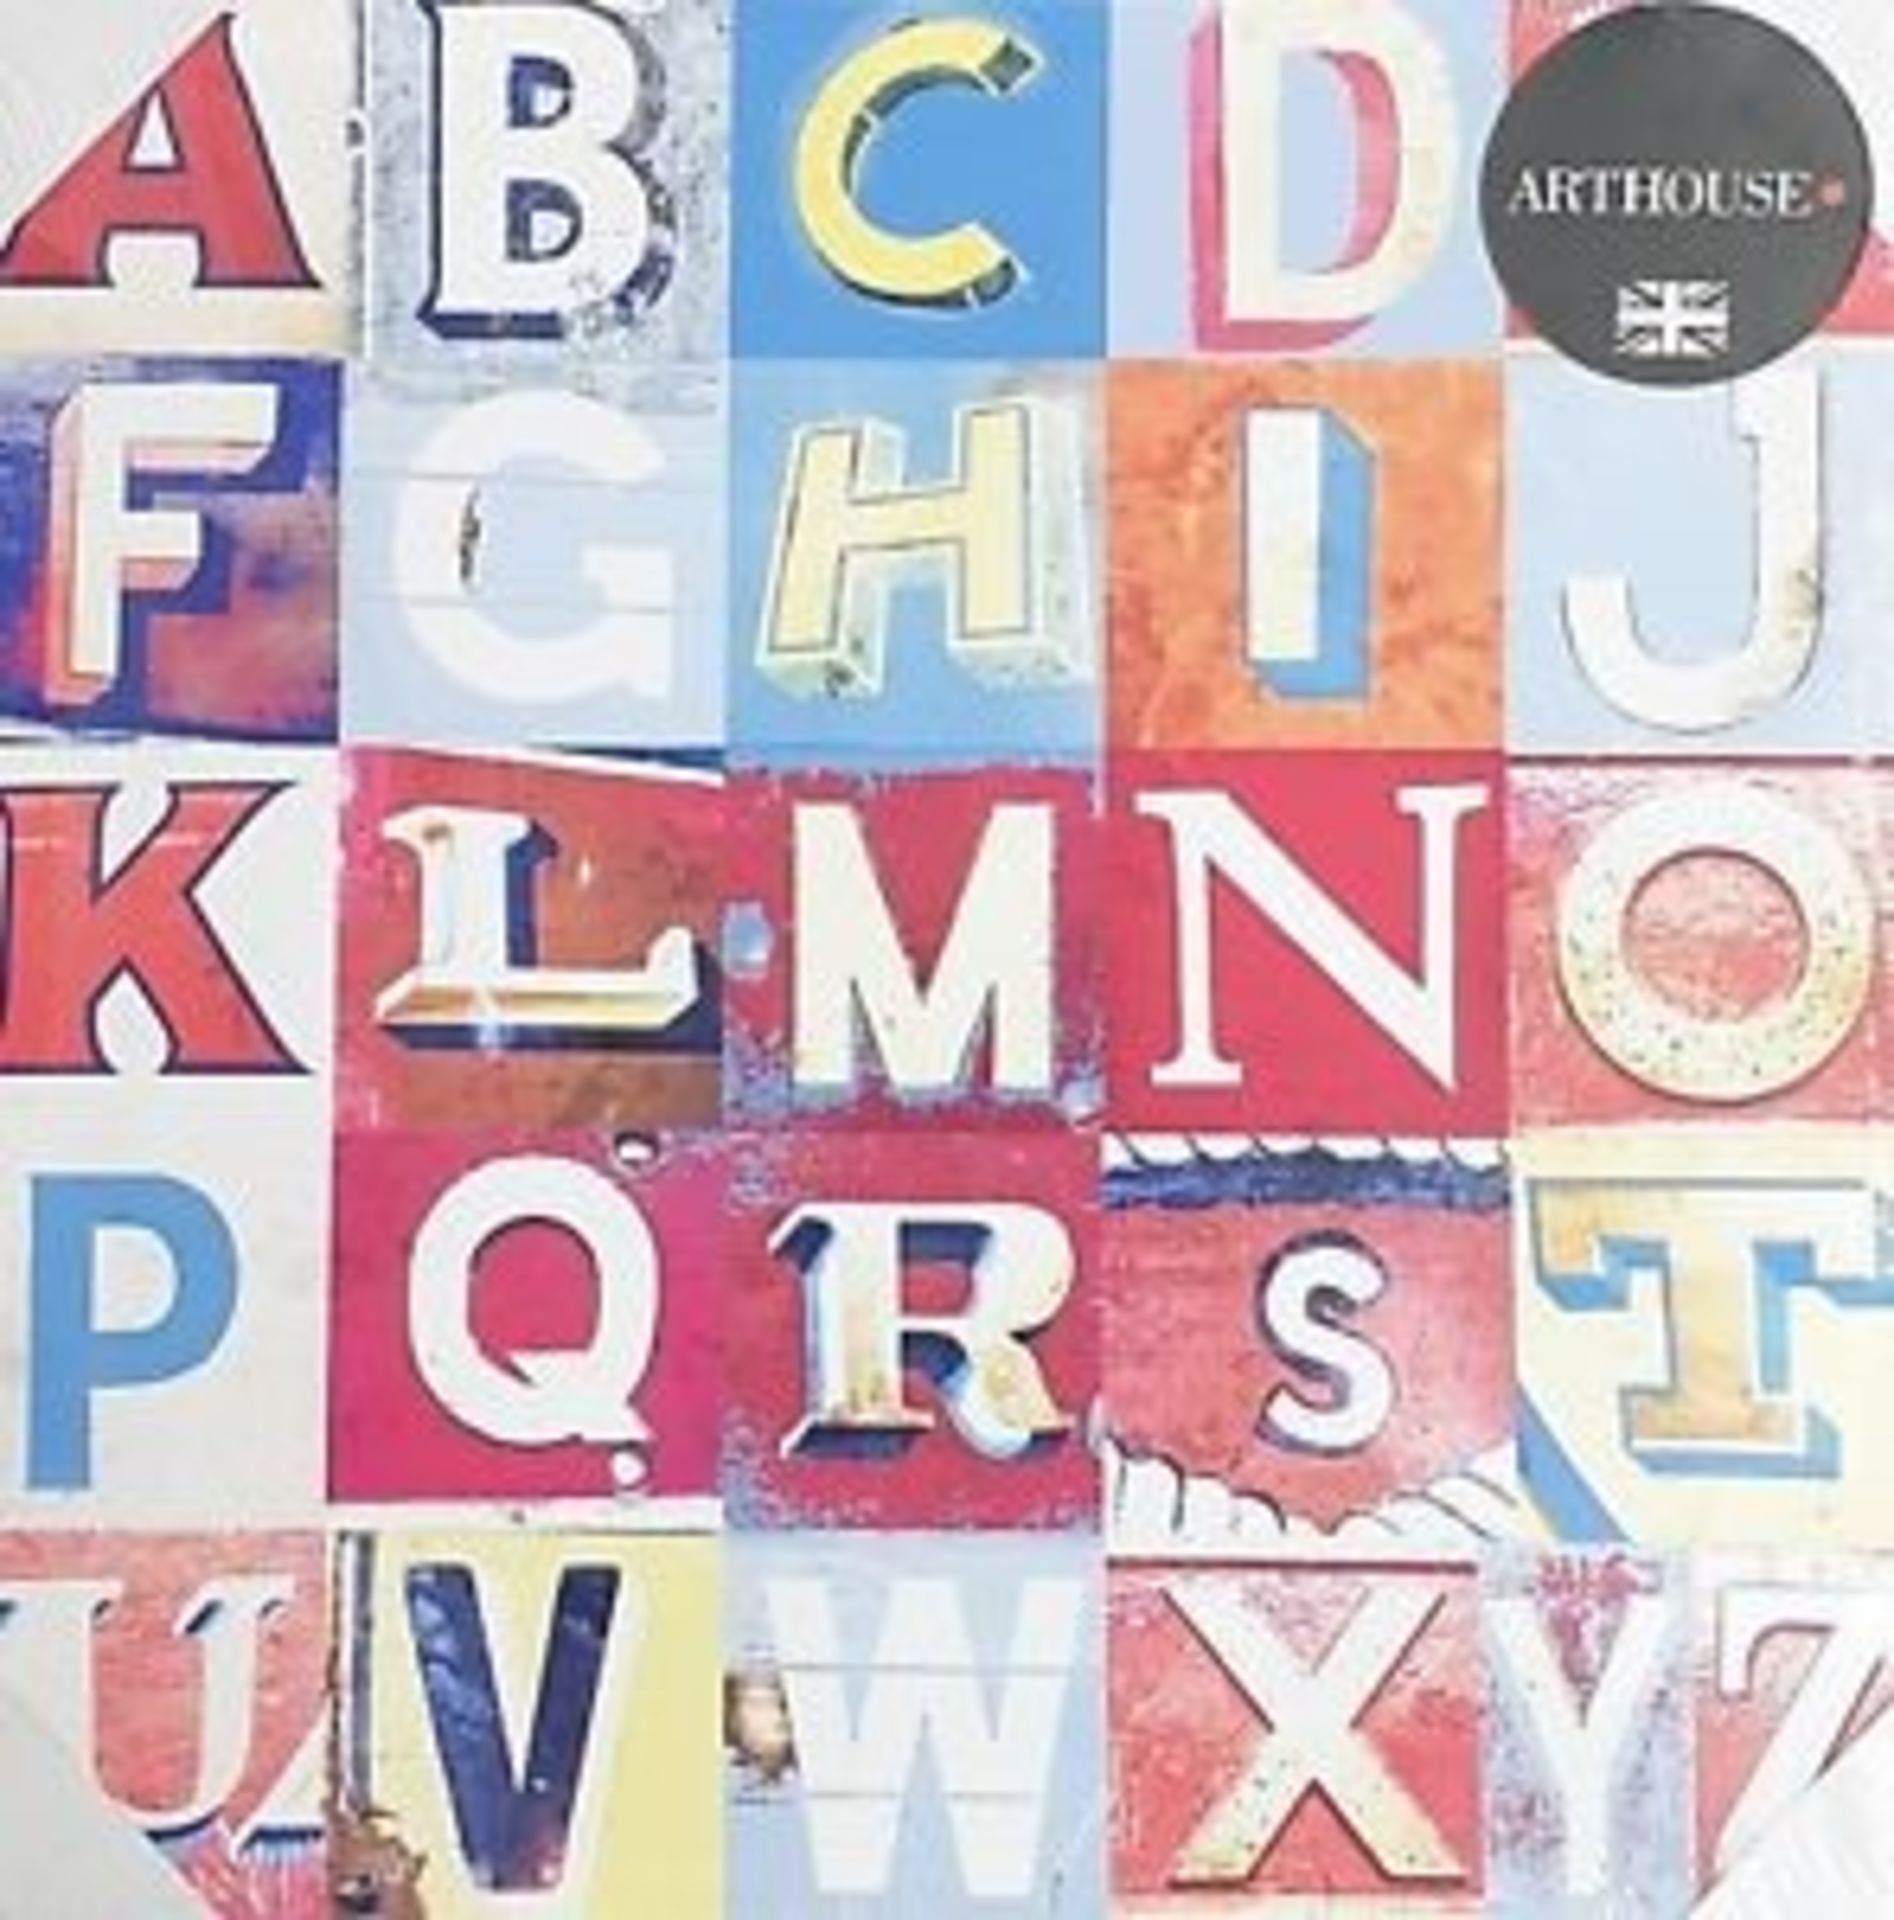 1 BRAND NEW BOXED ARTHOUSE ALPHABET CANVAS WALL ART 40CM X 40CM / RRP £12.00 (VIEWING HIGHLY